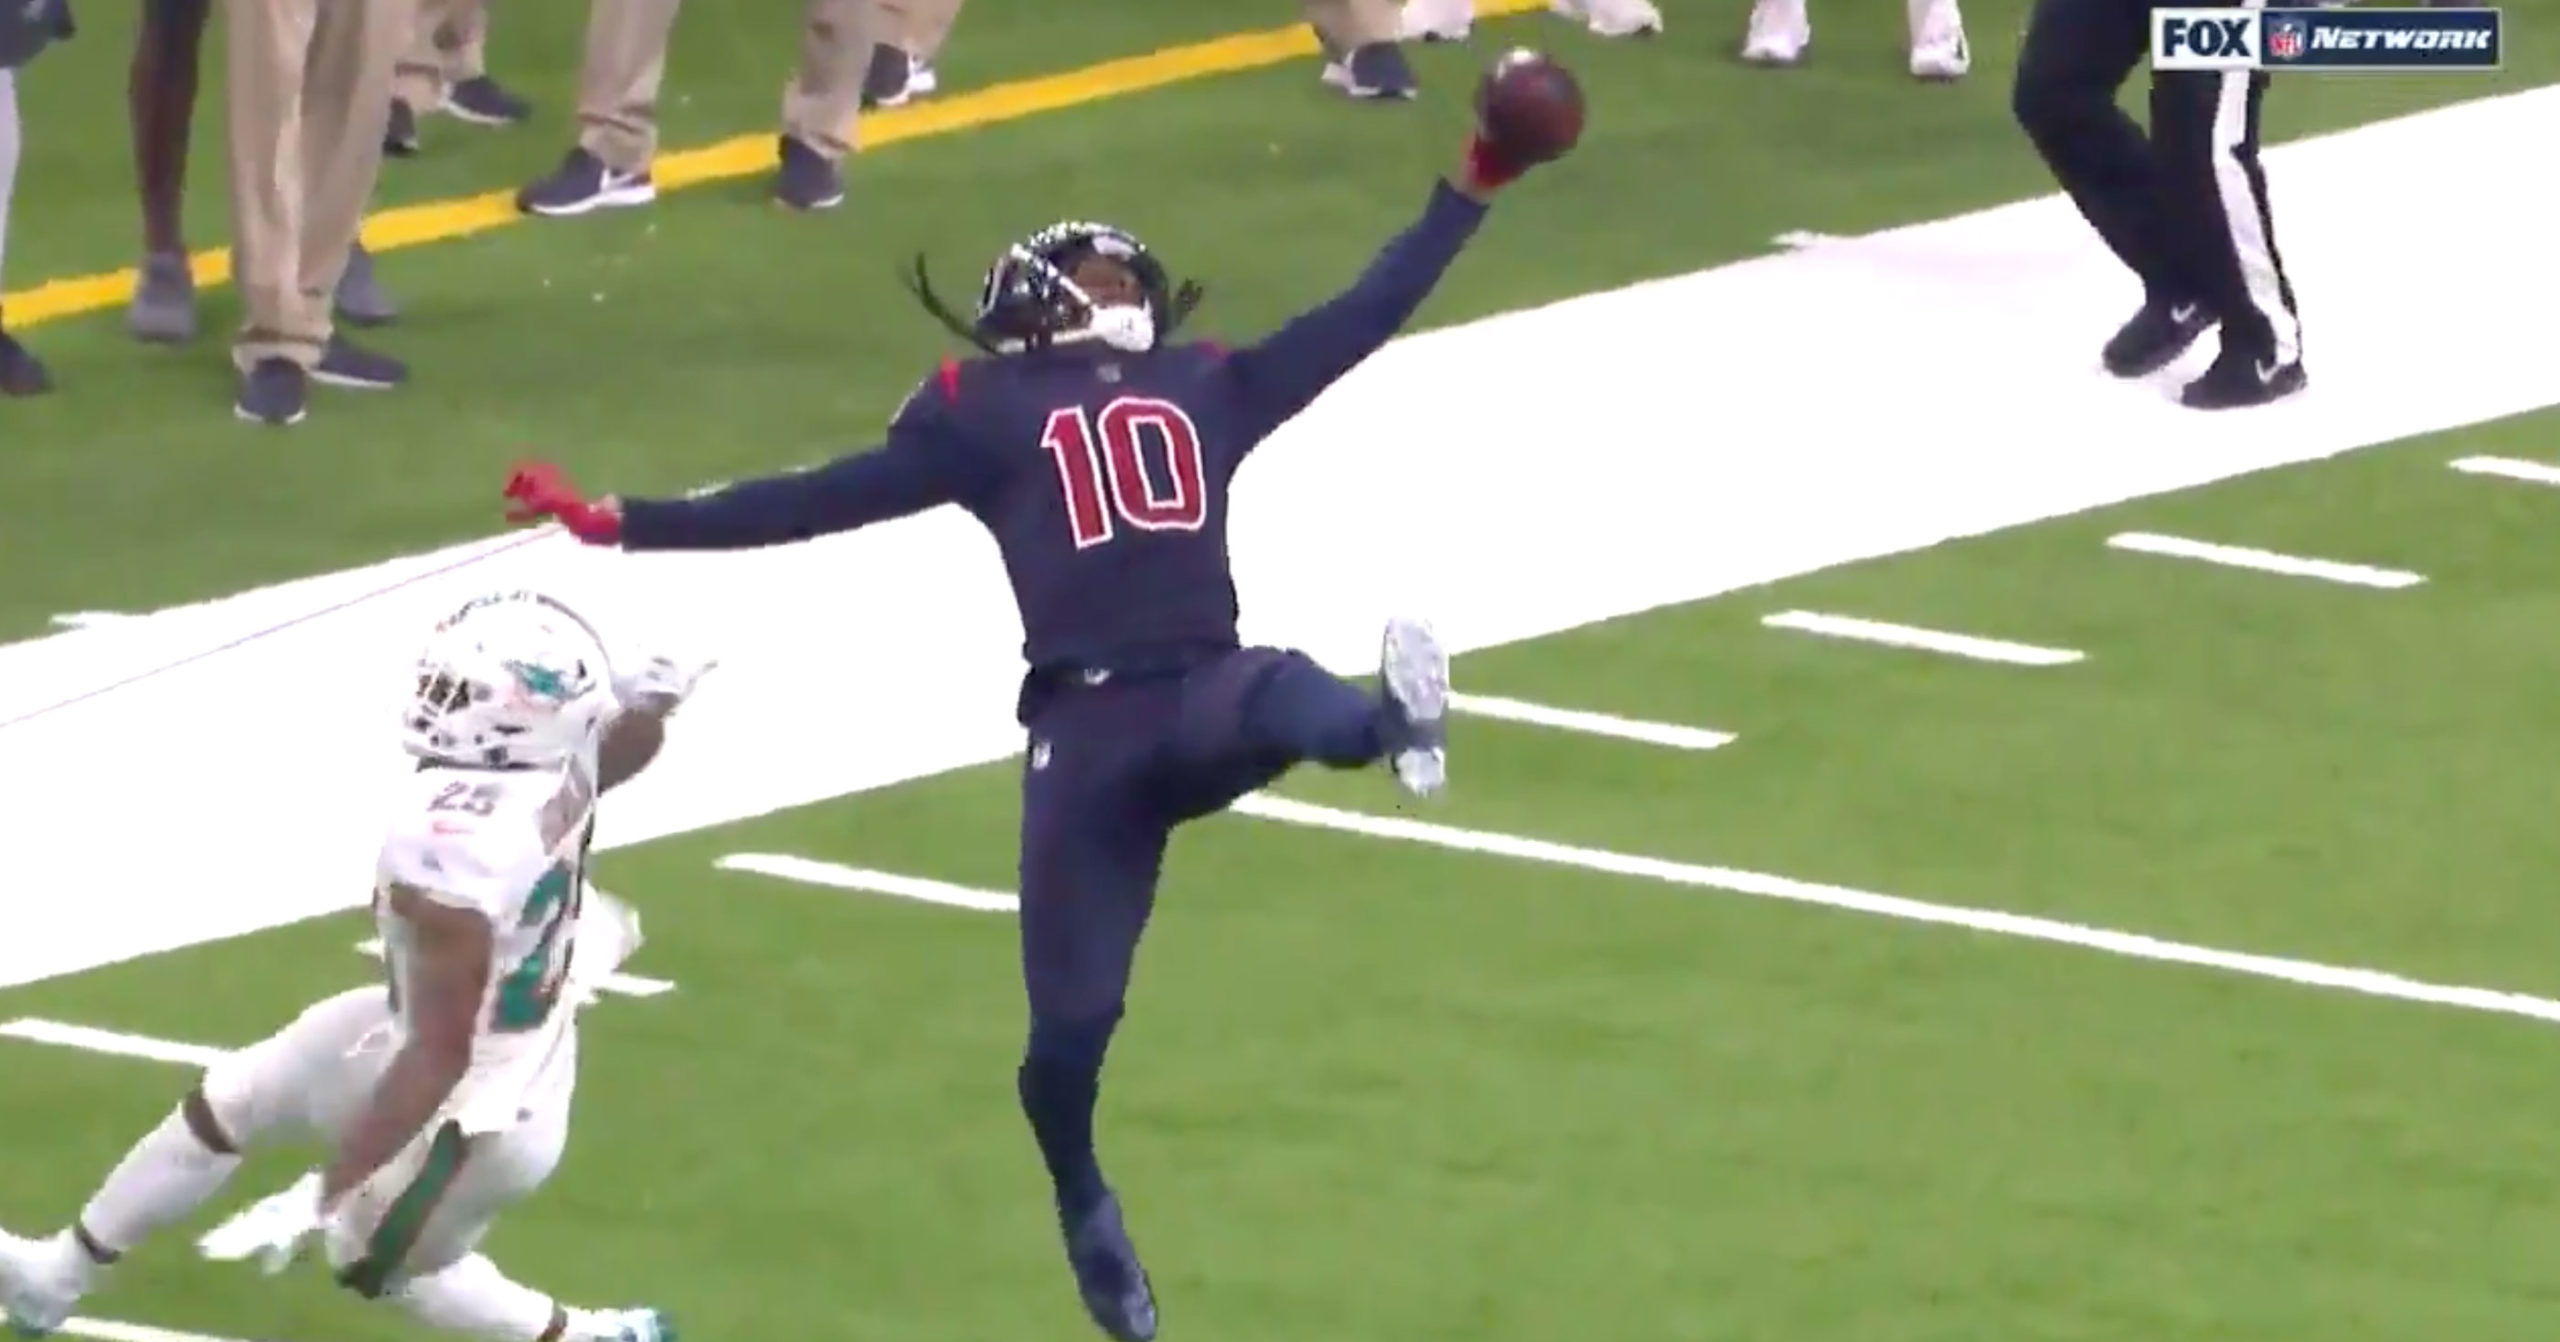 DeAndre Hopkins Makes Ridiculous One-Handed Catch Between His Legs